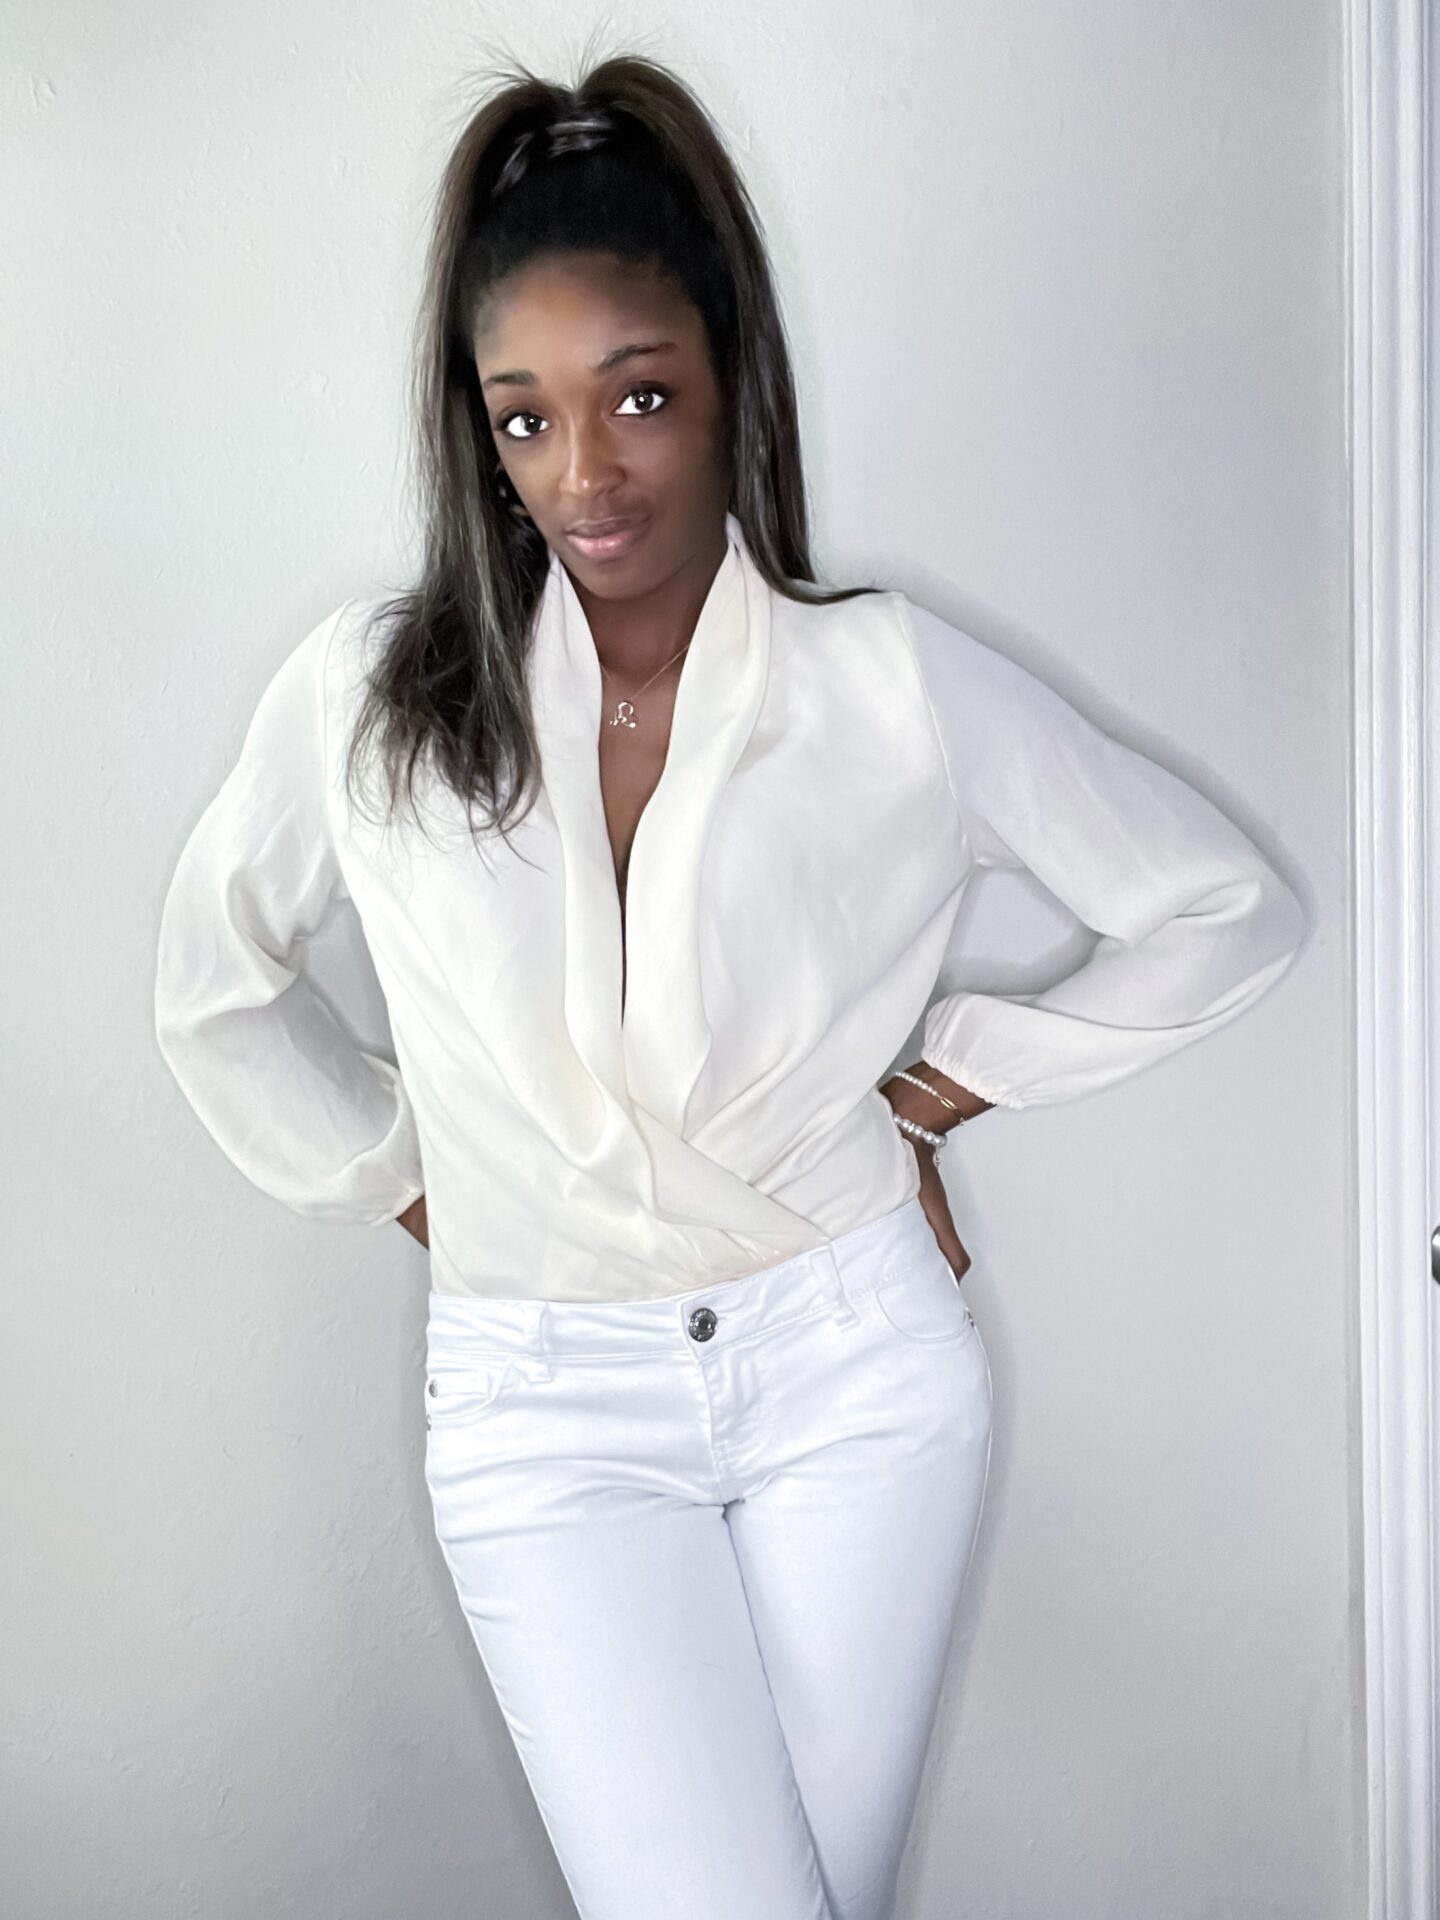 Loniesha Patterson, Birthday Post, The Pursuit of L, cream body suit, white pants, high ponytail, jewelry, Halloween